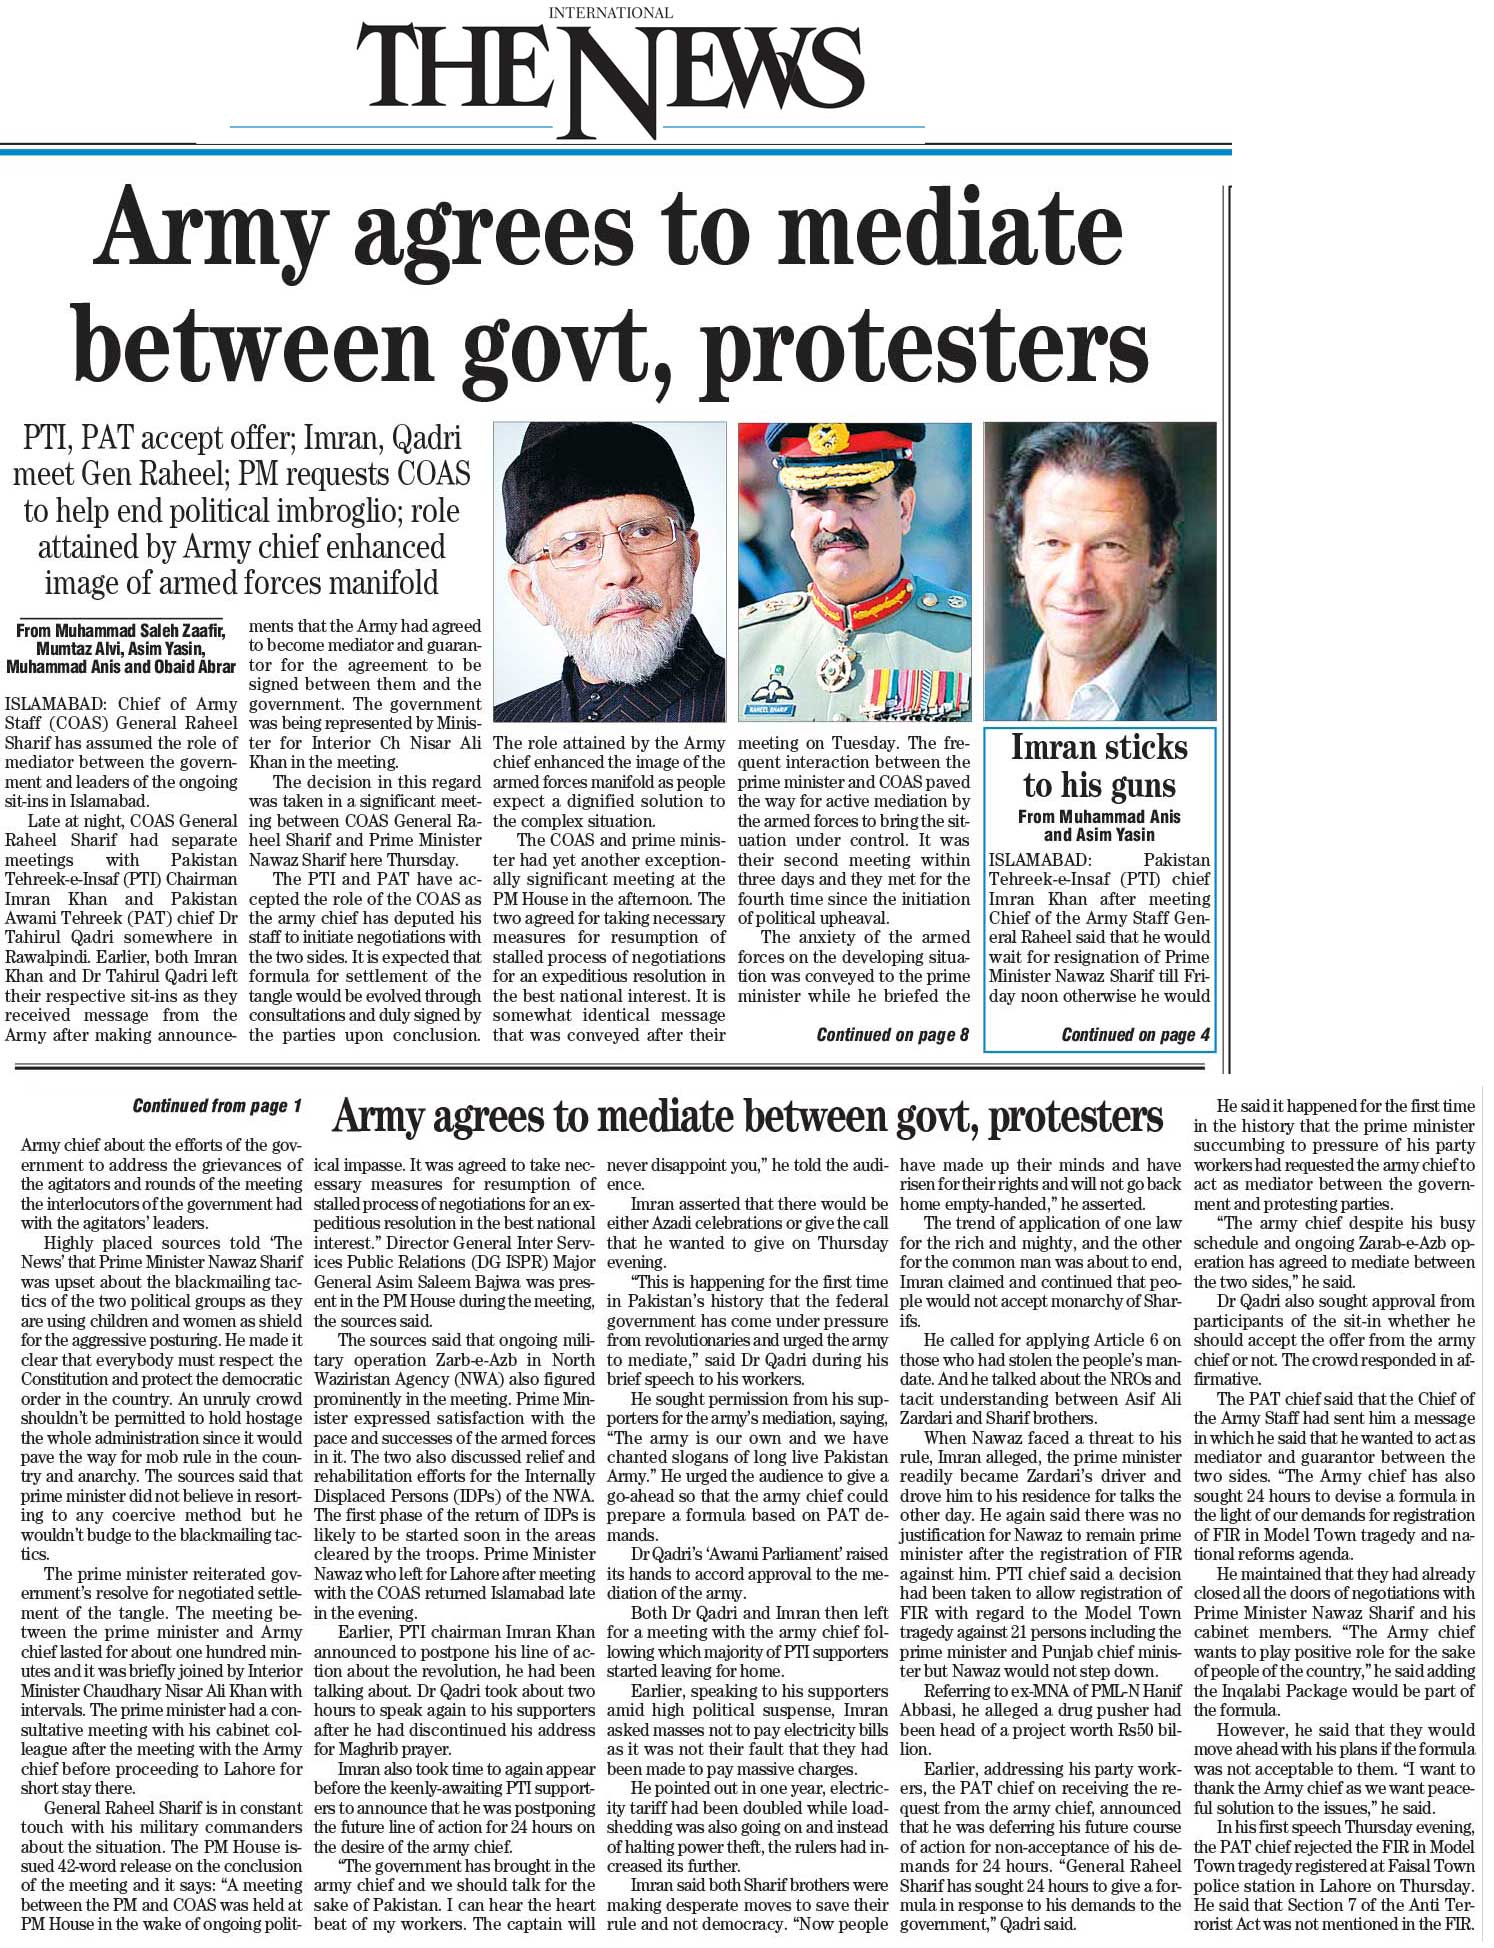 Minhaj-ul-Quran  Print Media Coverage Daily The News Front Page